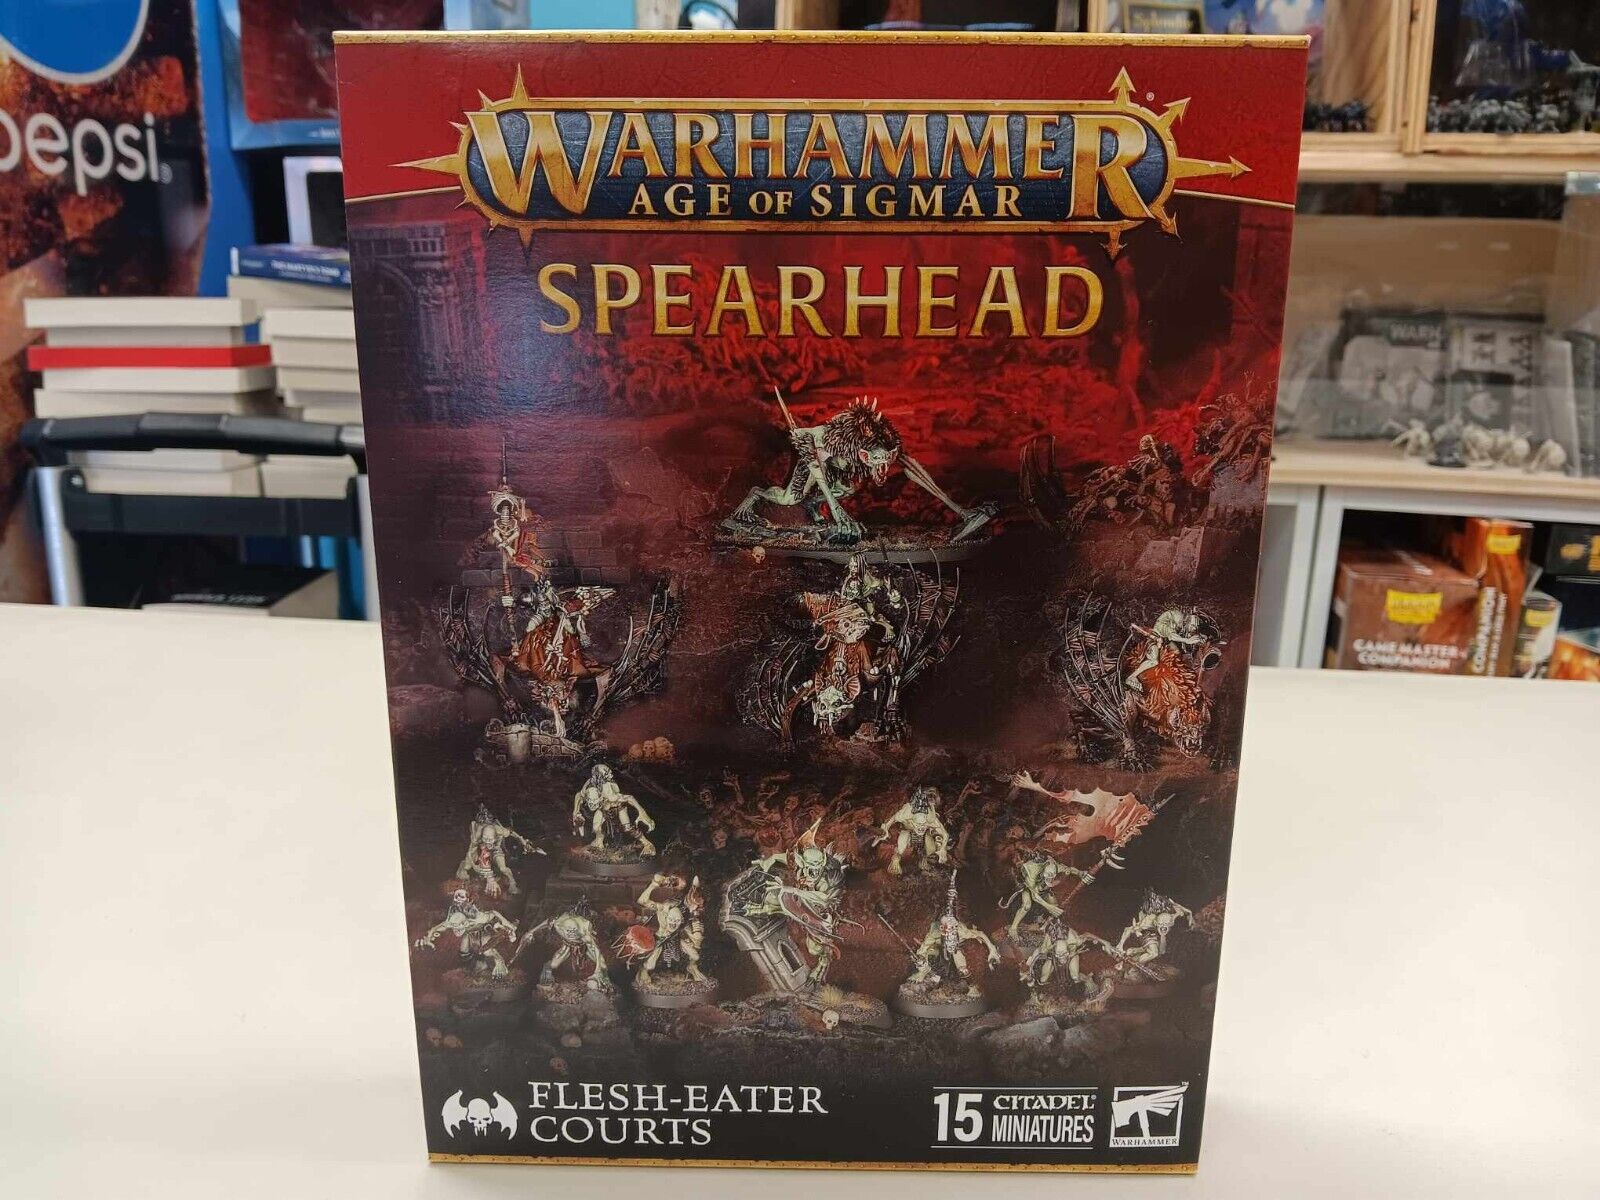 Warhammer 40K Age Of Sigmar Spearhead Flesh-Eater Courts Mini Figures